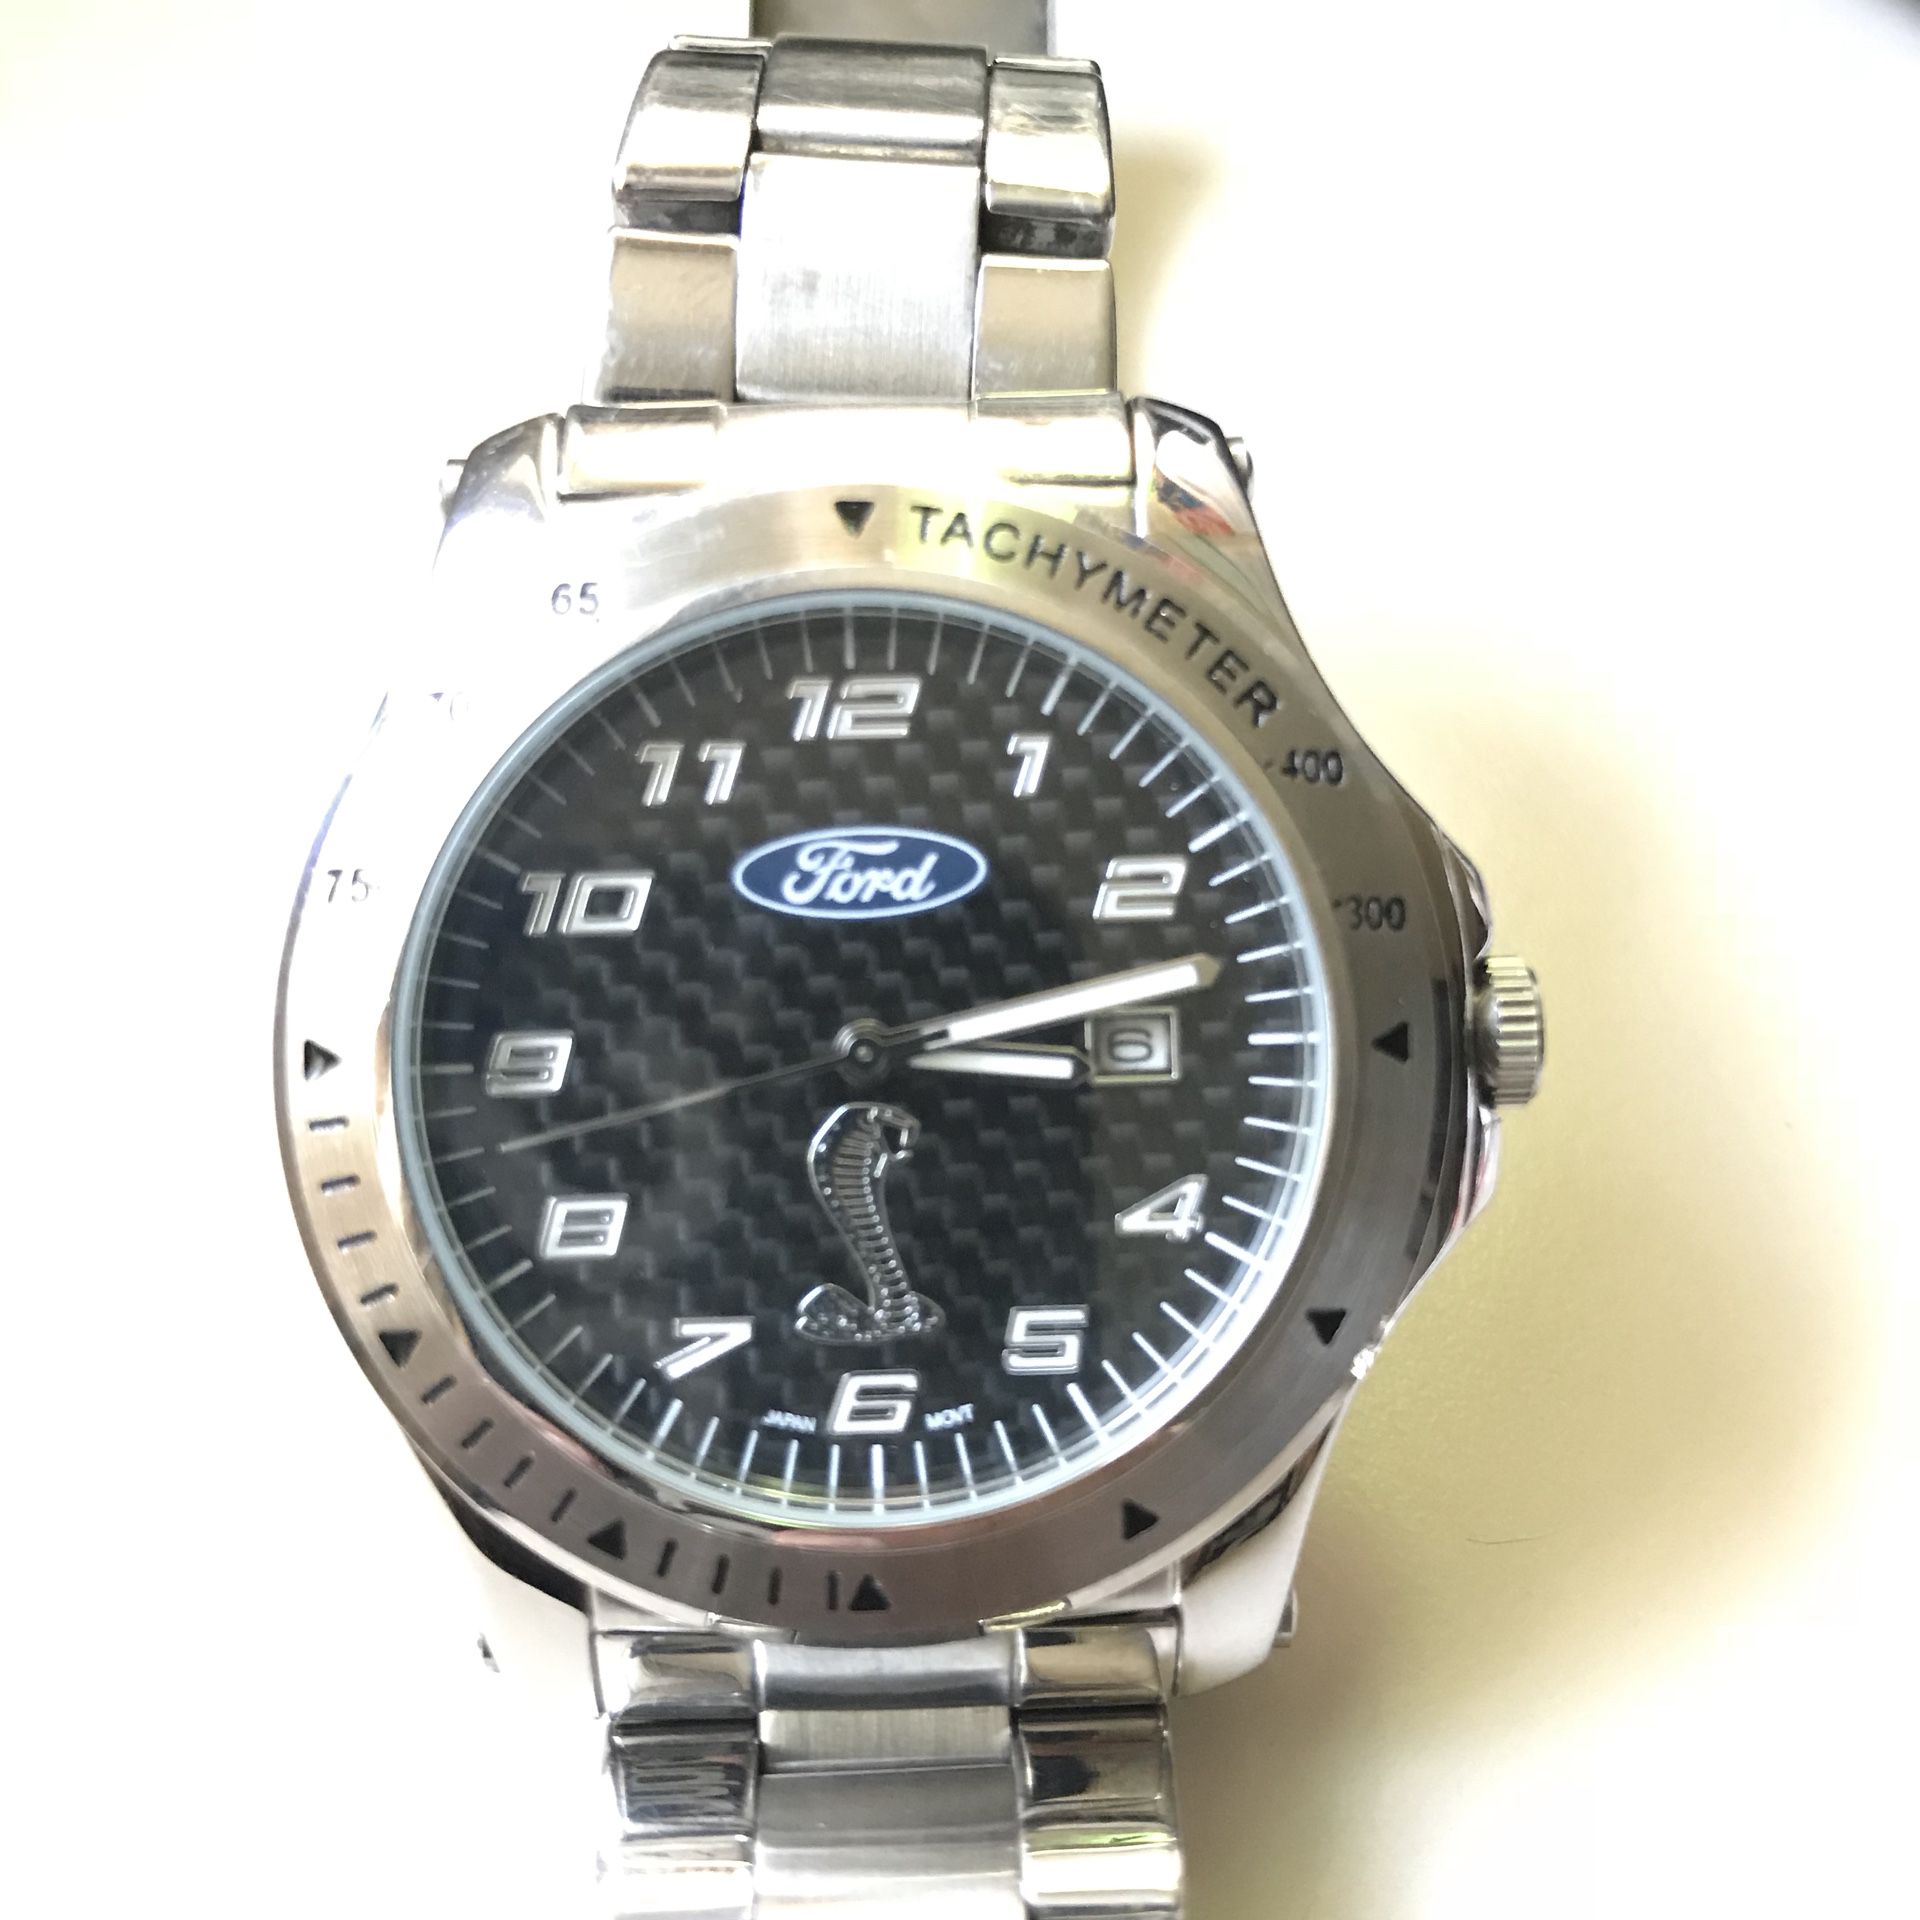 Ford shelby watch very good condition